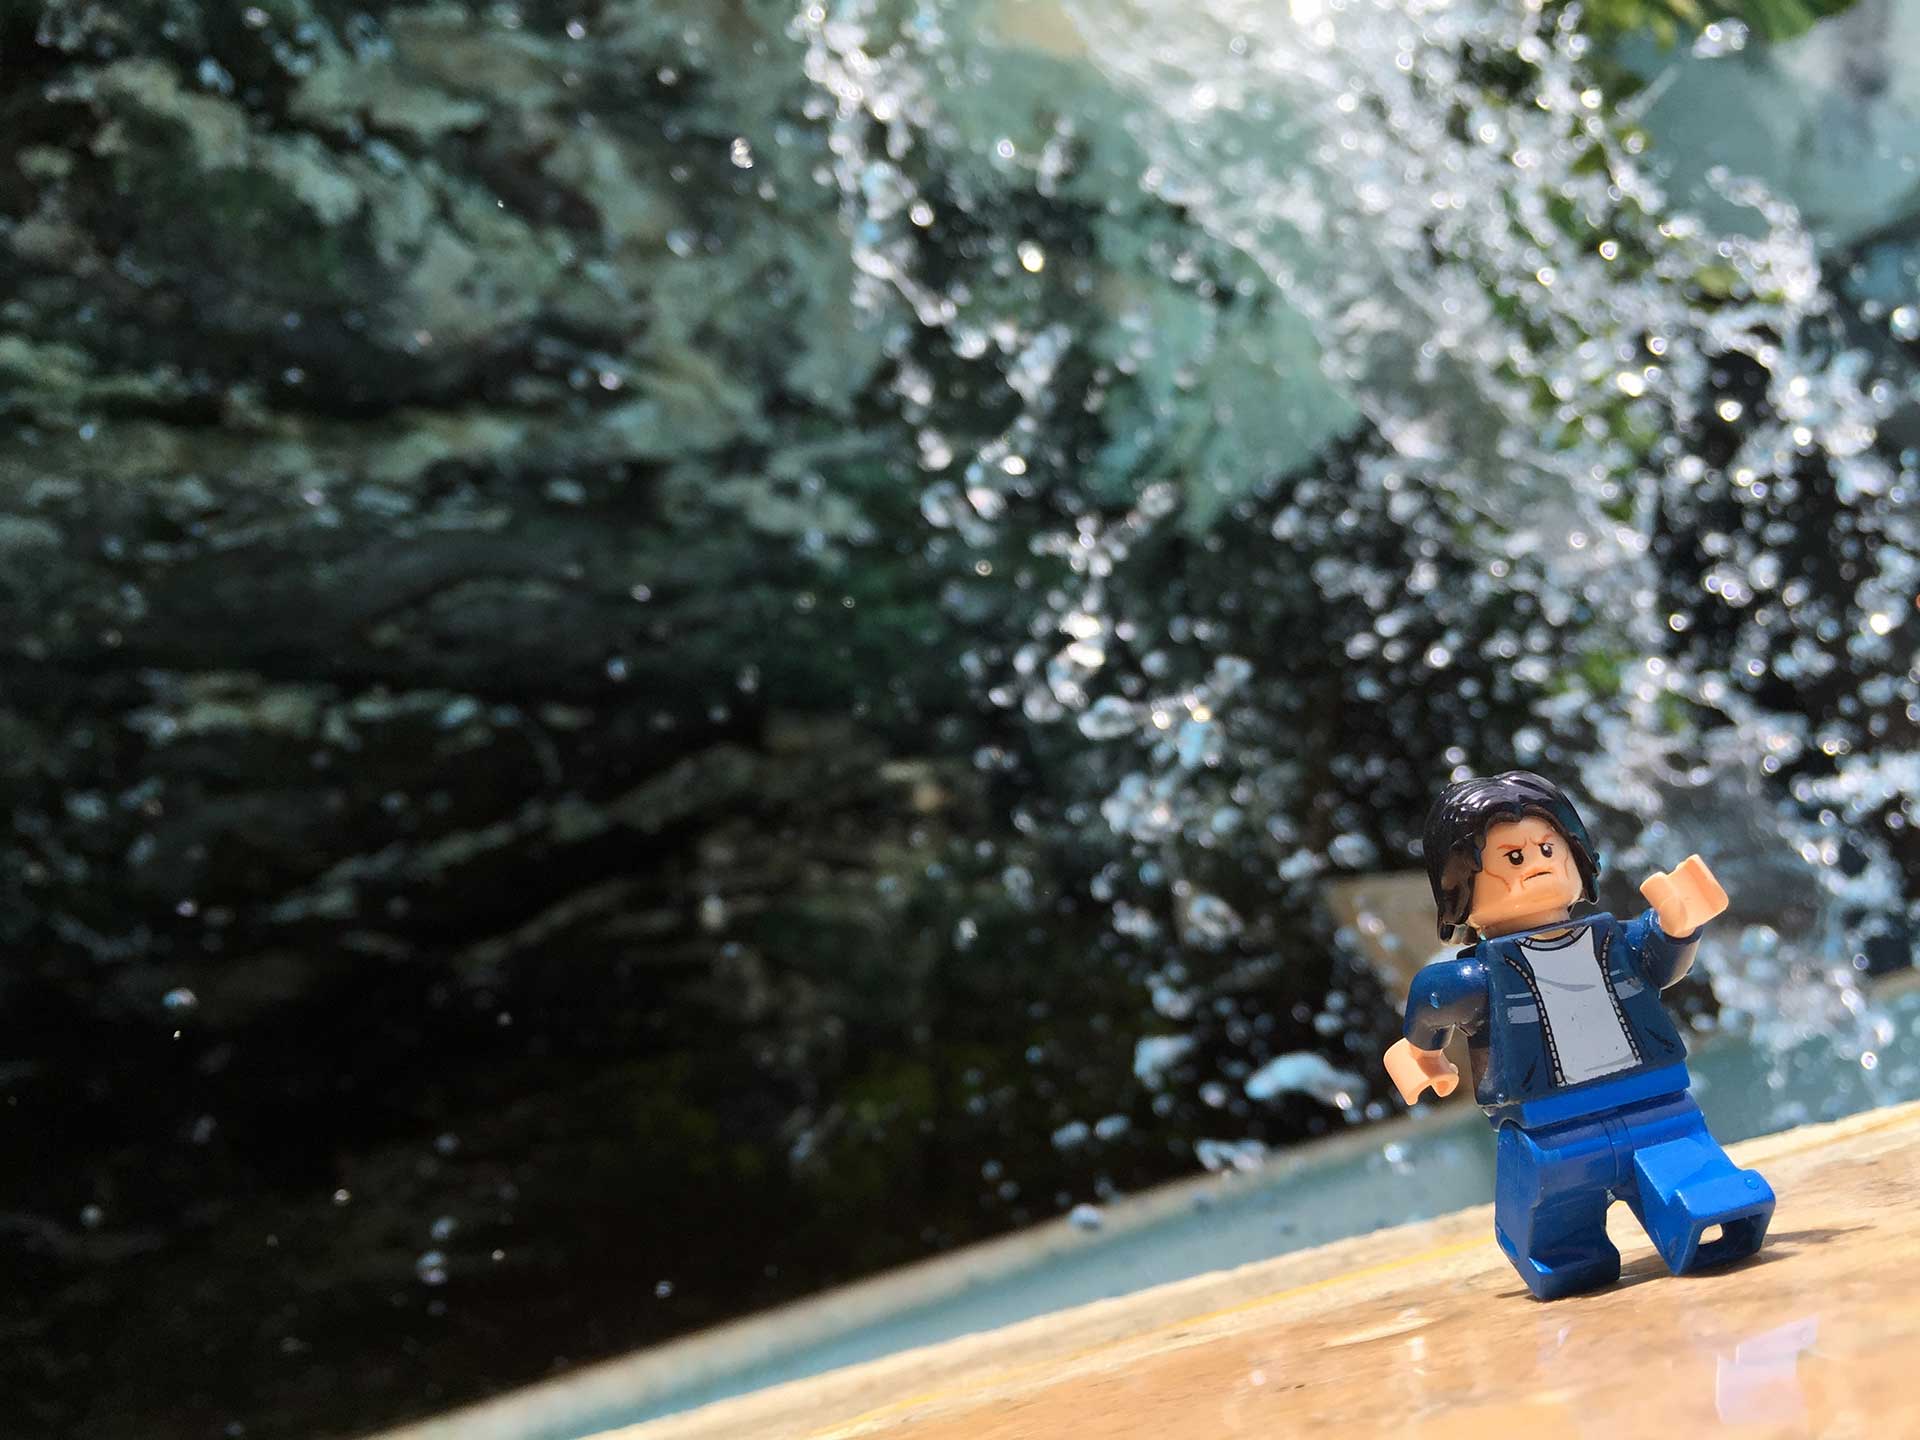 Lego Uncle Jim at the Waterfall